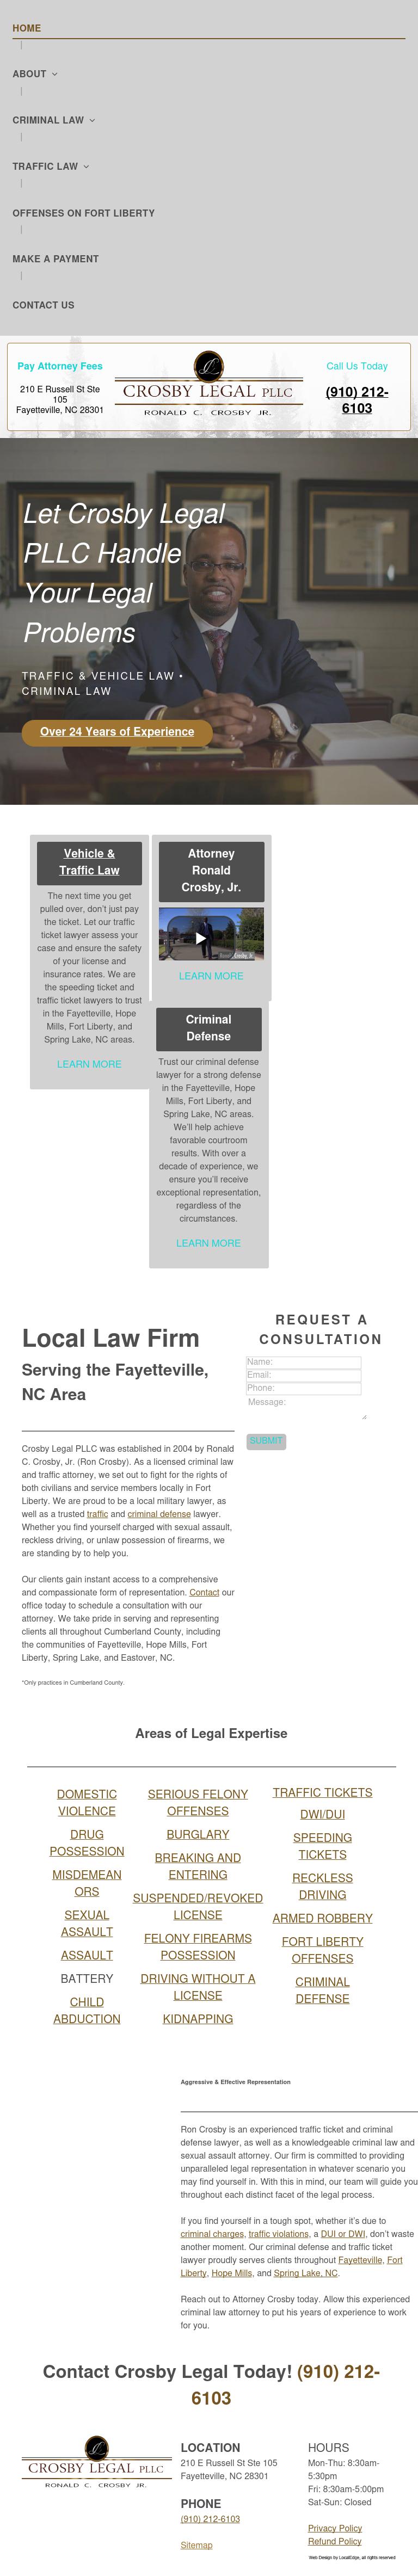 Crosby Legal, PLLC - Fayetteville NC Lawyers